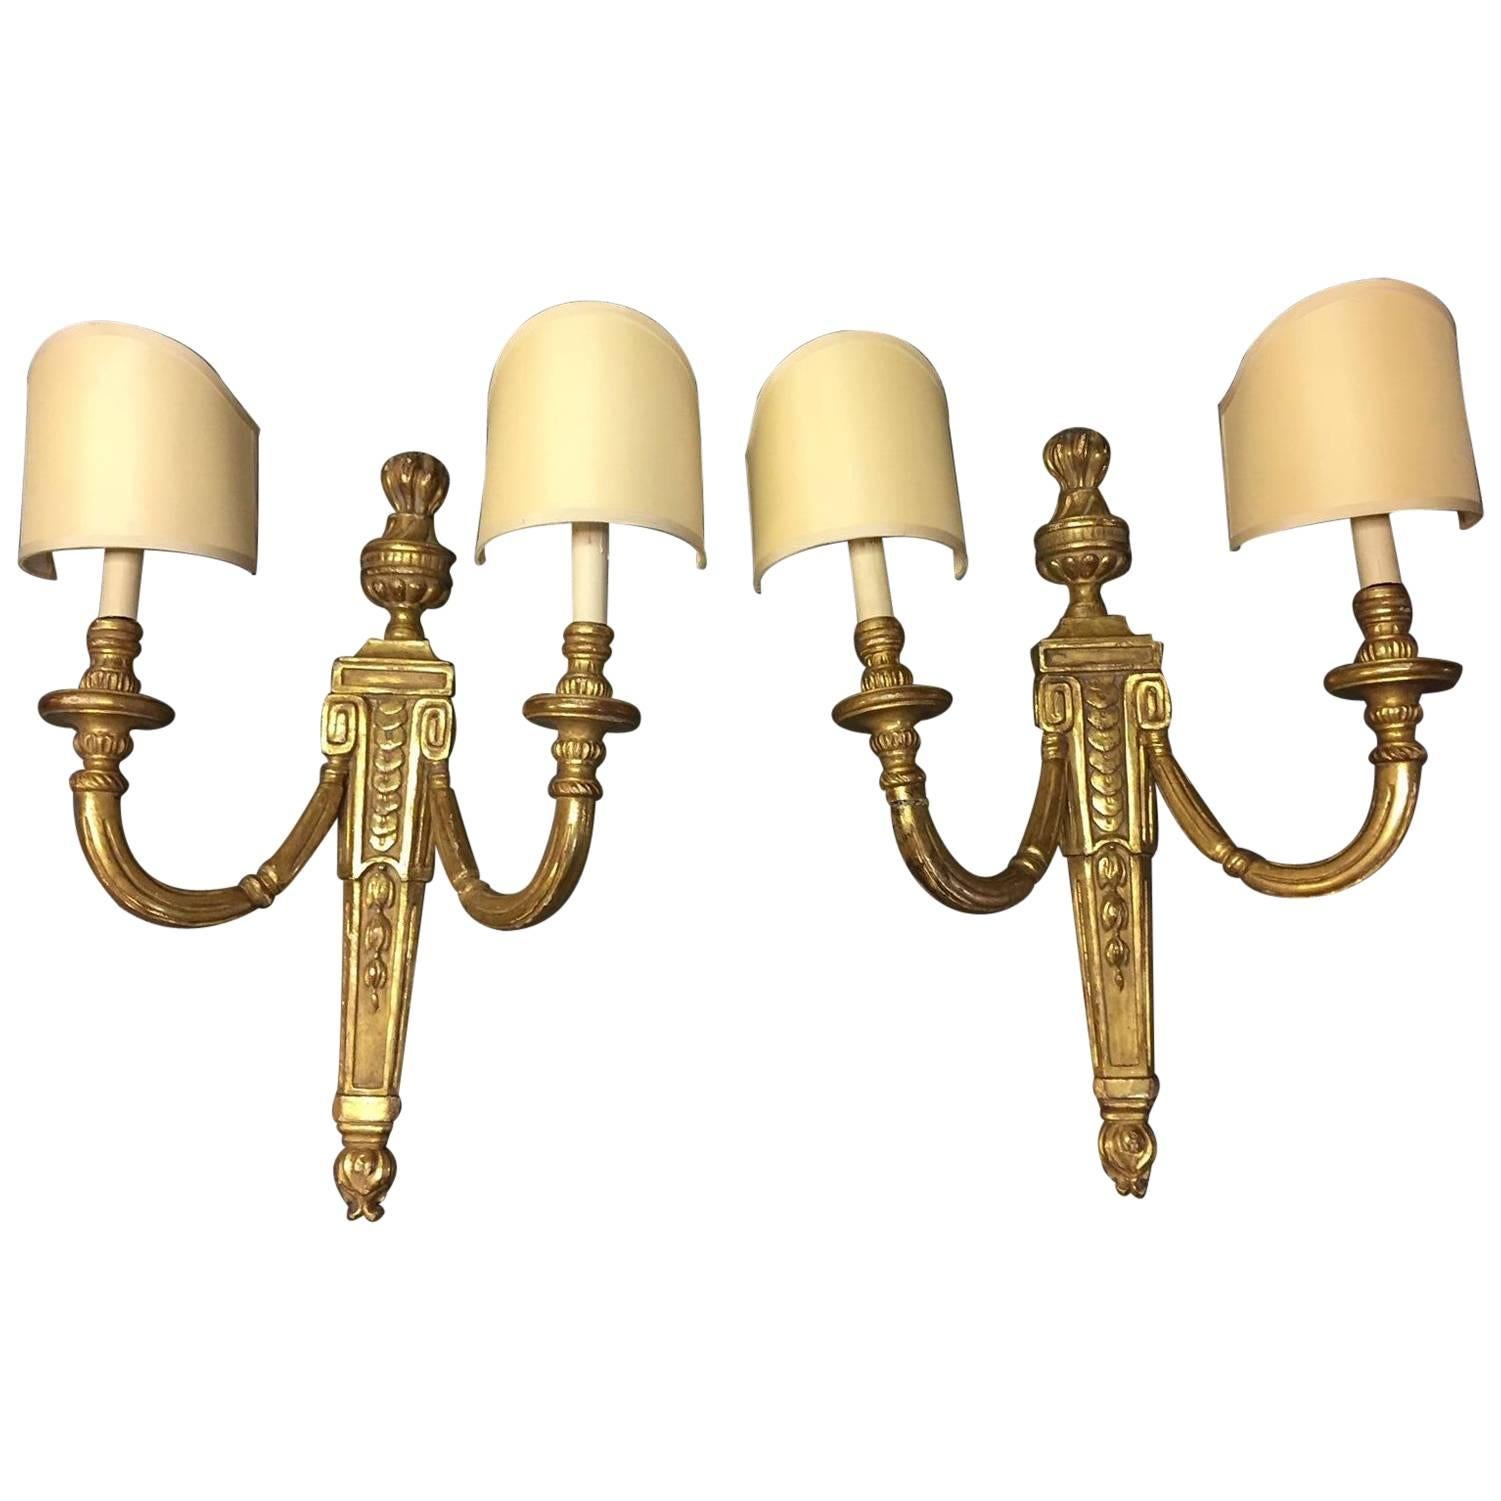 Large Pair of Italian Neoclassical Style Giltwood Sconces For Sale